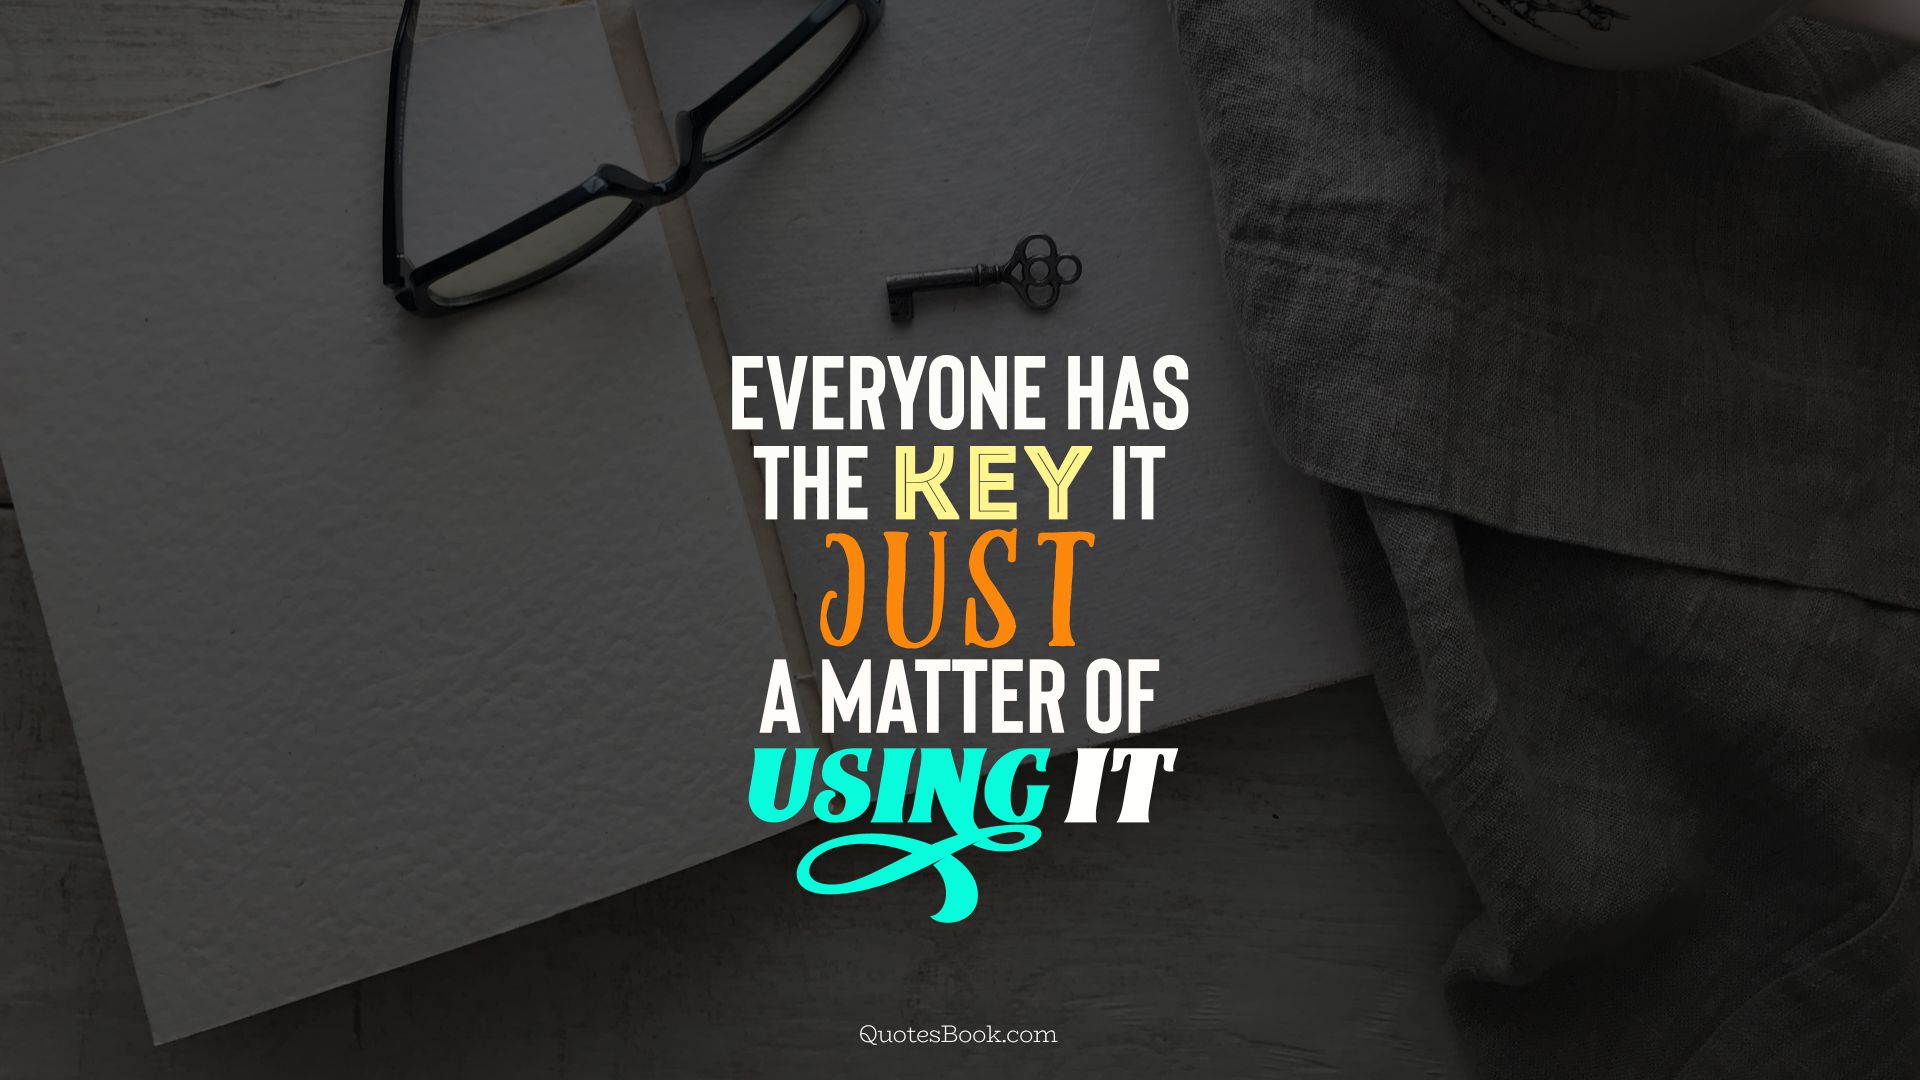 Everyone has the key it just a matter of using it